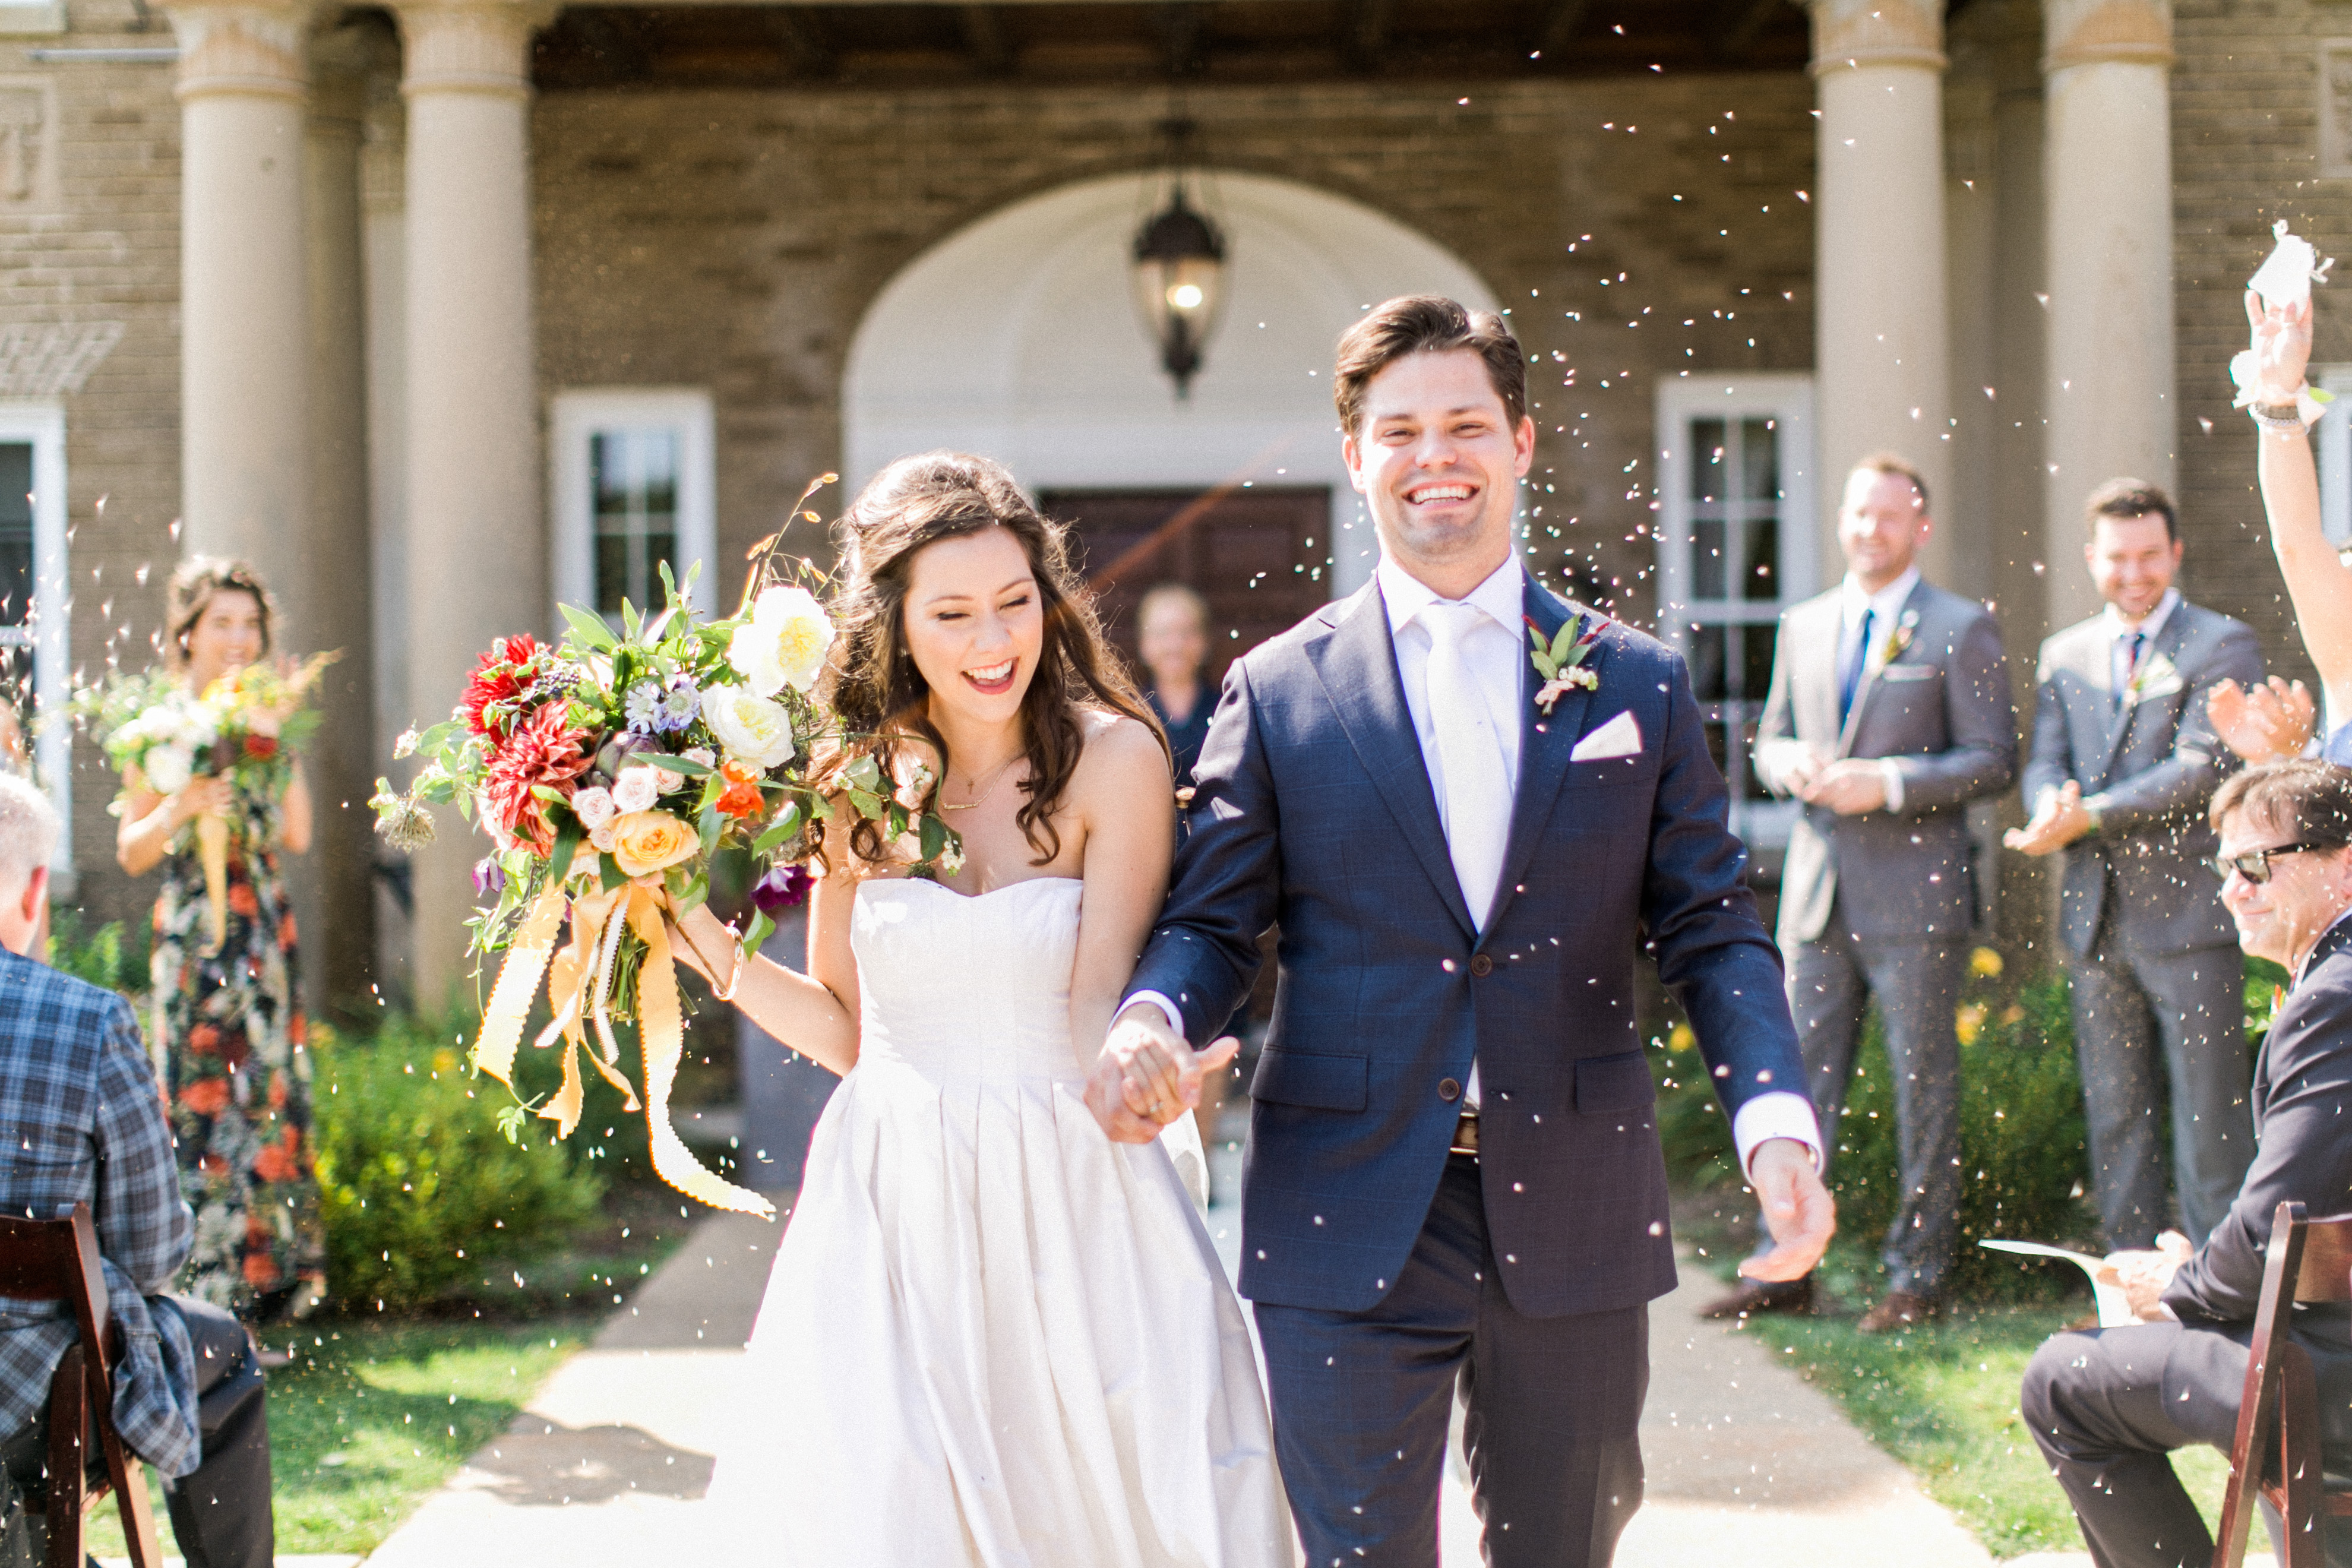 Wedding Exit Ideas | The Day's Design | Cory Weber Photography